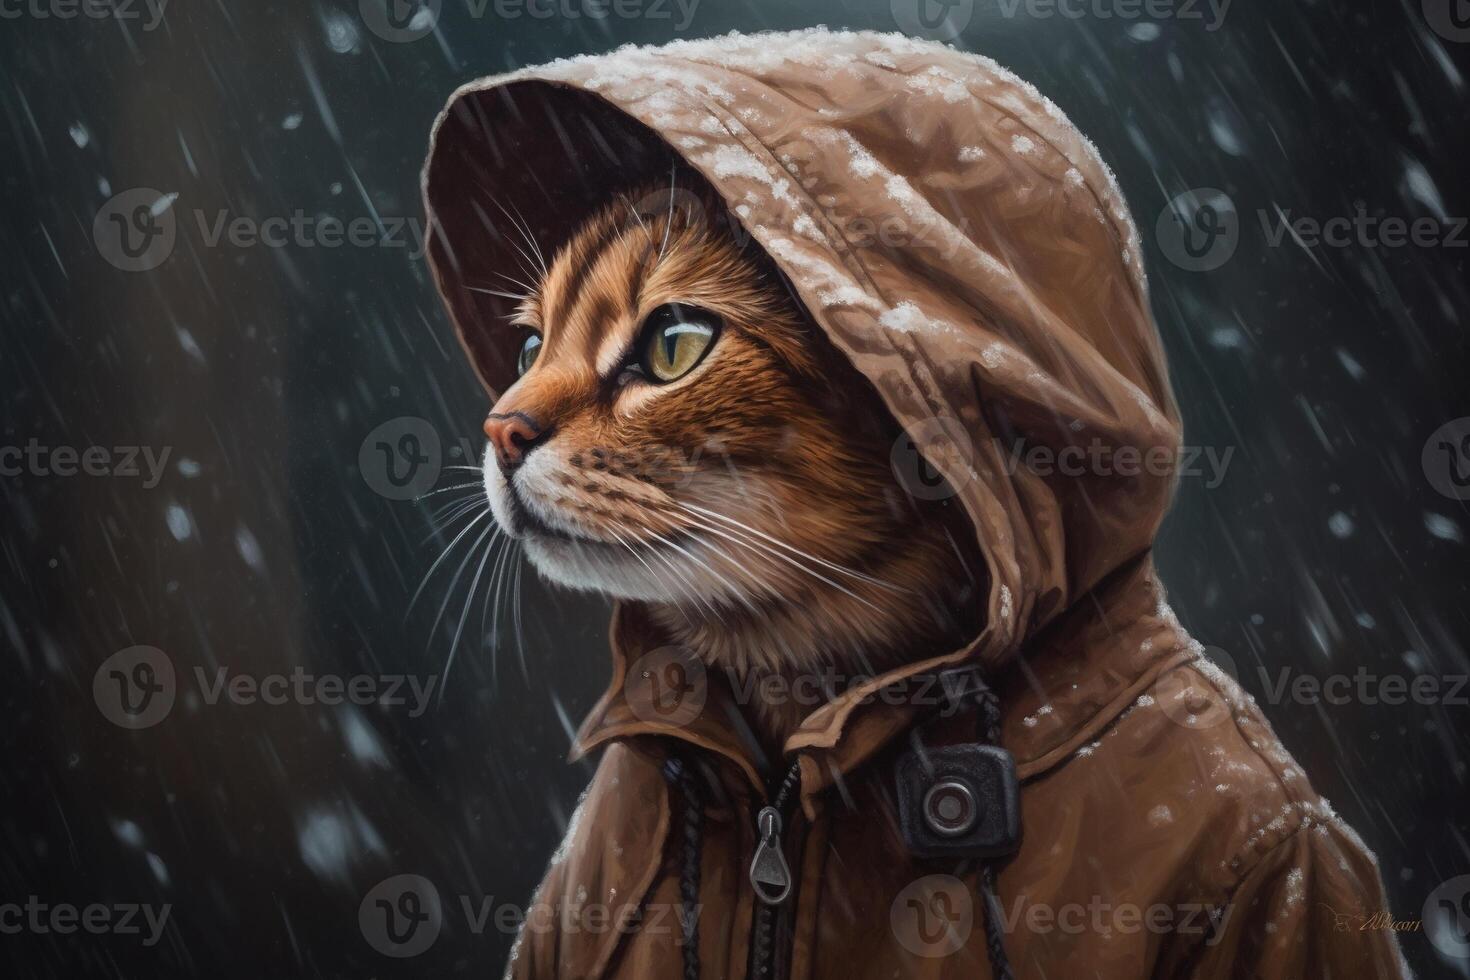 , abyssinian cat adventurer in winter forets. Oil Painting of cute pet, animal wear clothes. photo